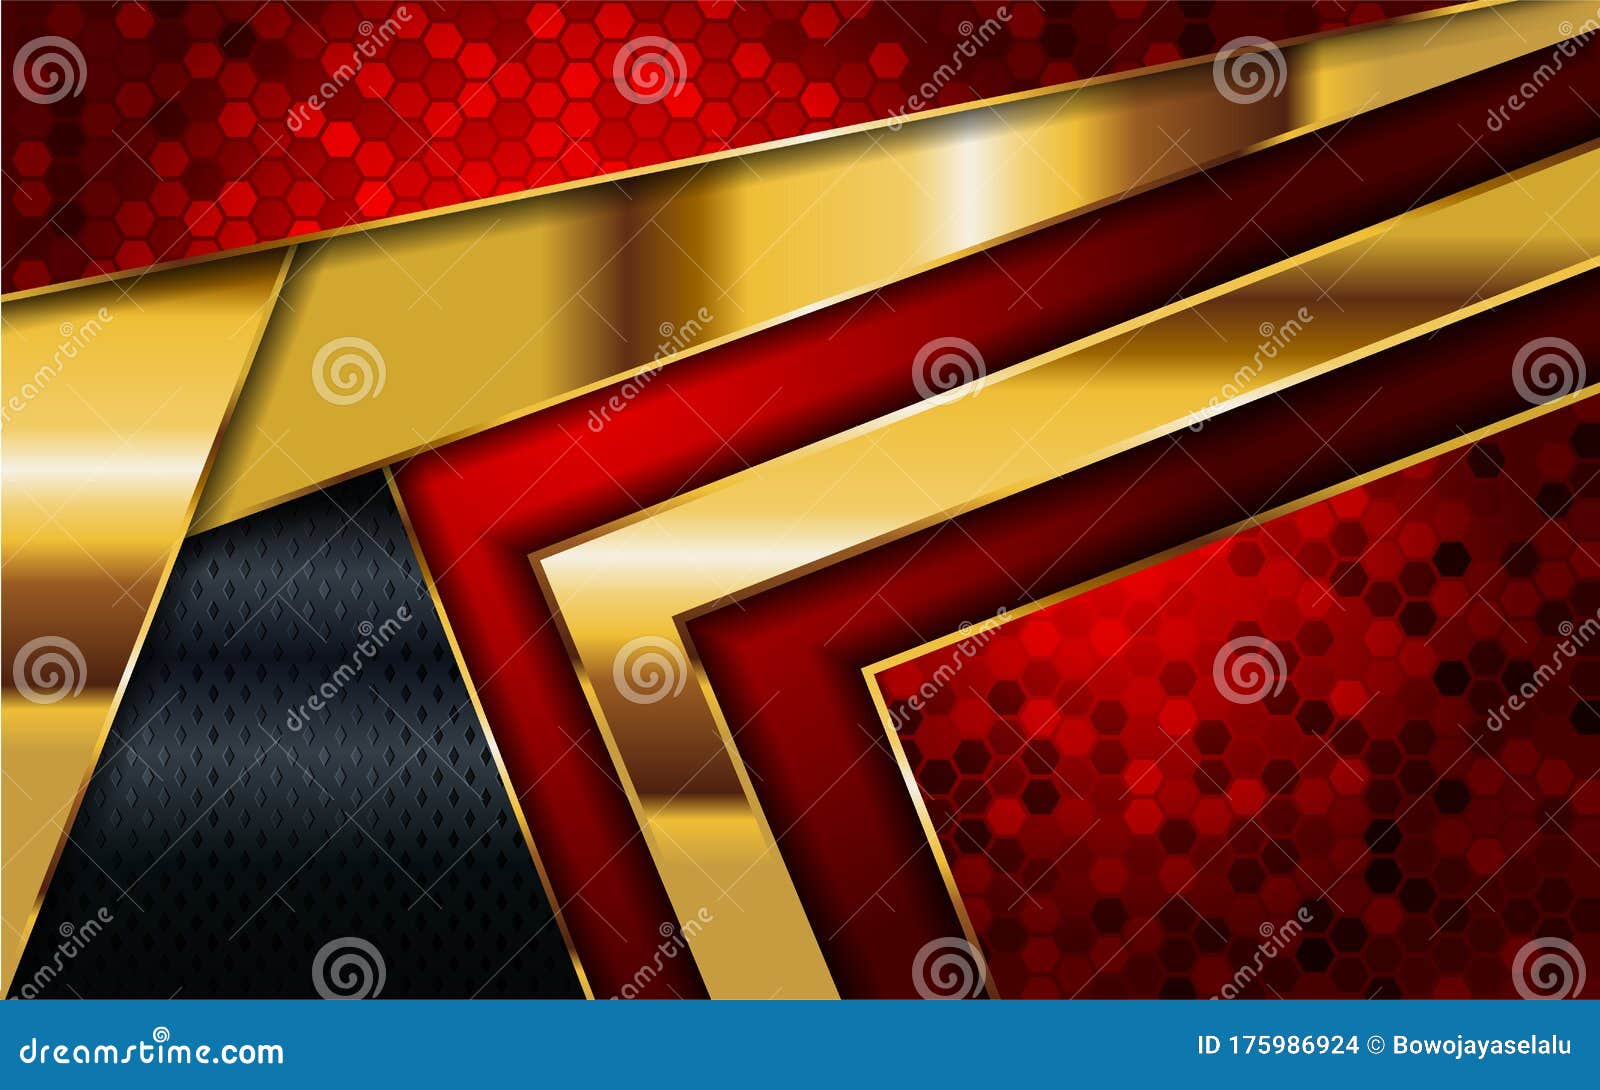 Luxury Red, Gold and Black Combination Background Design Stock Vector -  Illustration of board, cover: 175986924